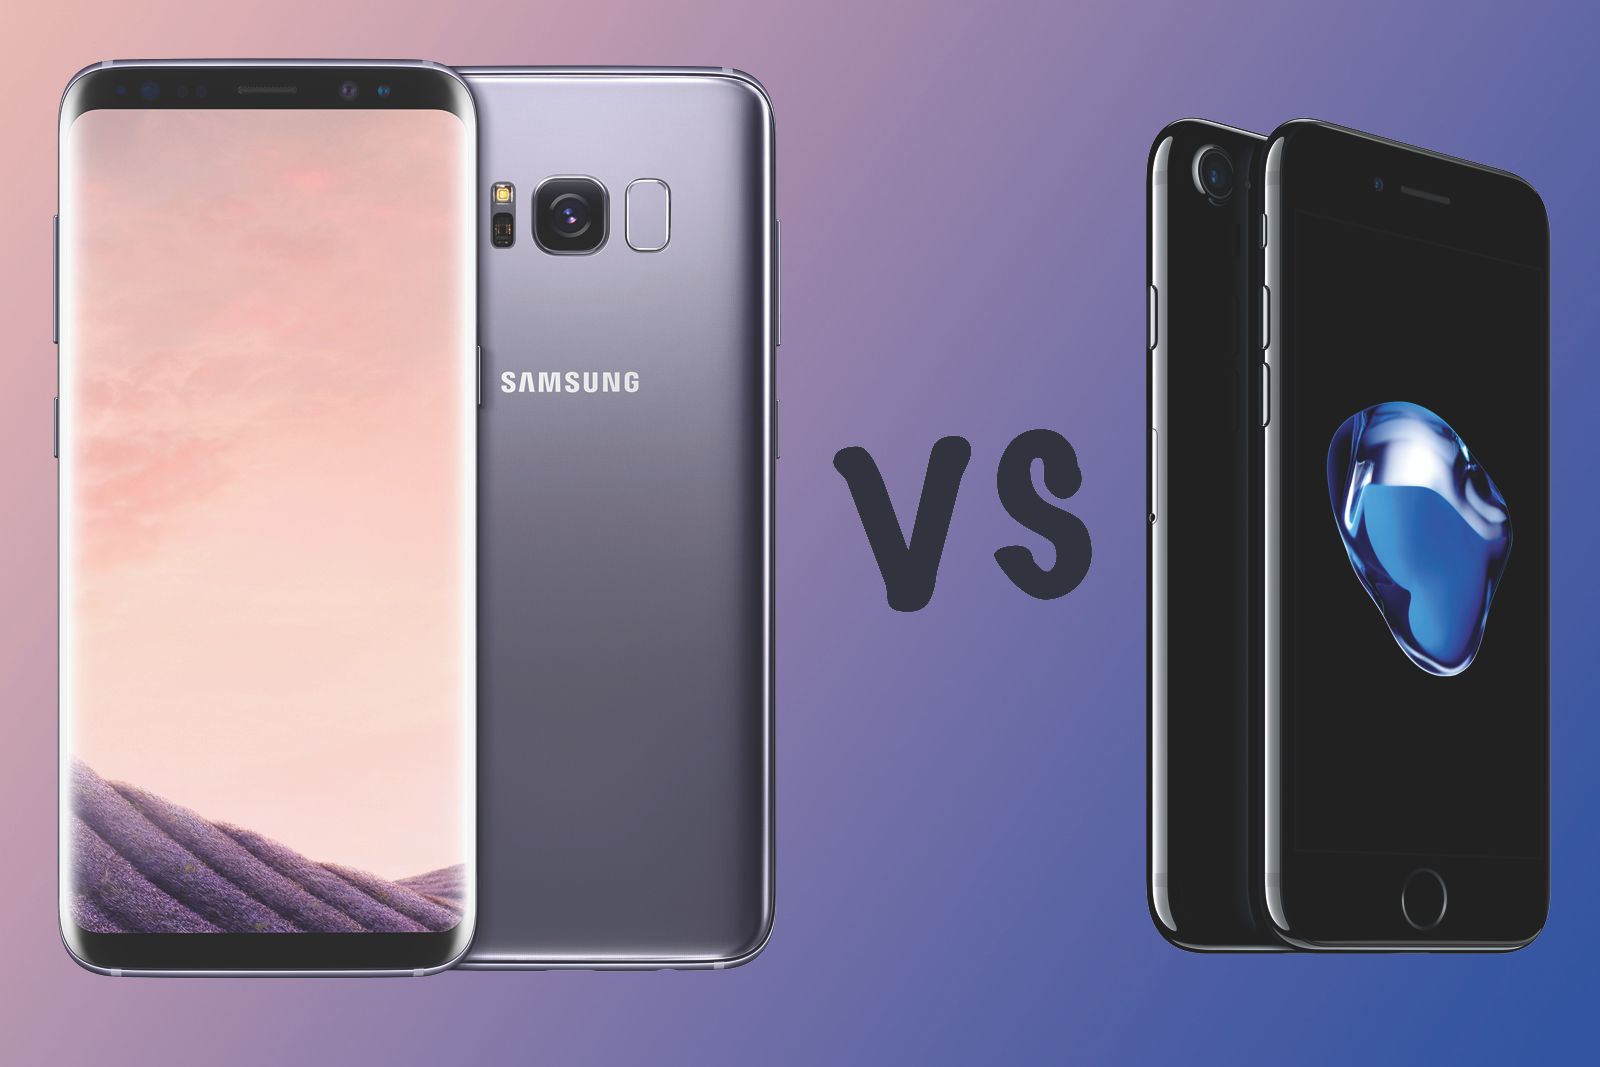 samsung galaxy s8 vs apple iphone 7 what s the difference  image 1